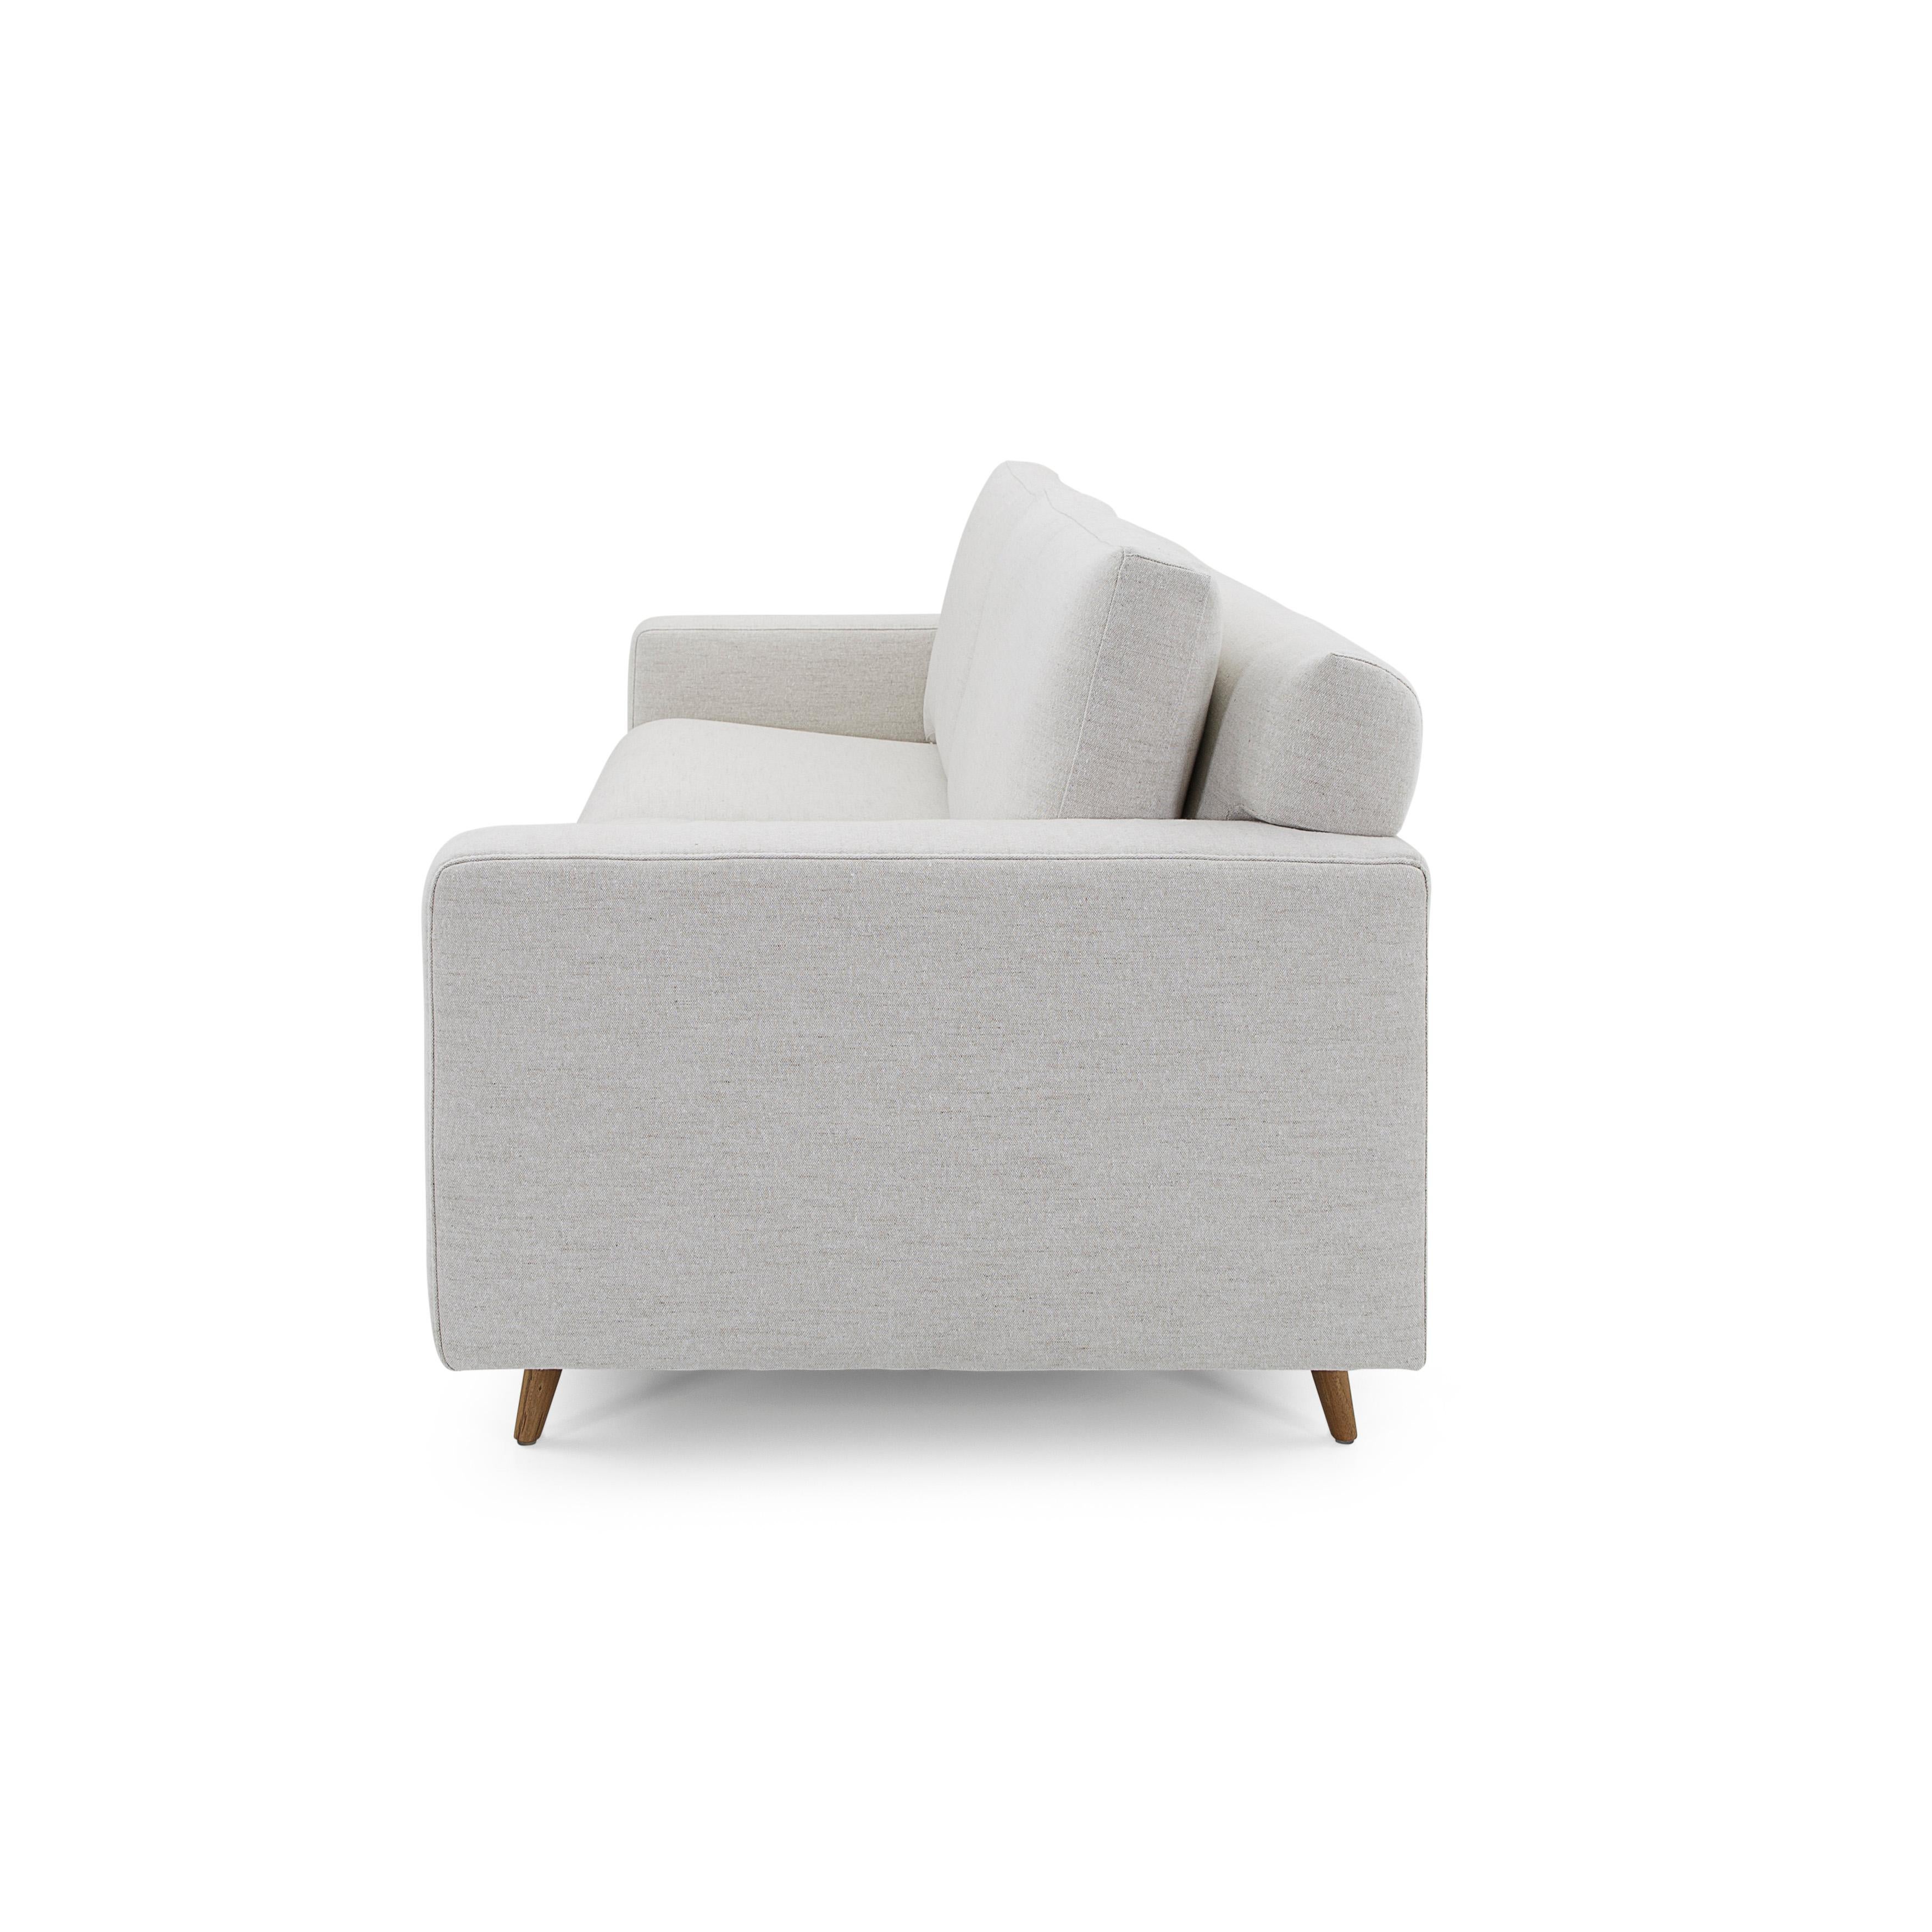 The Belt sofa with detailed arms inspired by the highest European seams, upholstered in a stunning off-white fabric, and its teak wood finish legs, is here for you and your family. As relaxing as it looks, the actual seat is even better. This sofa